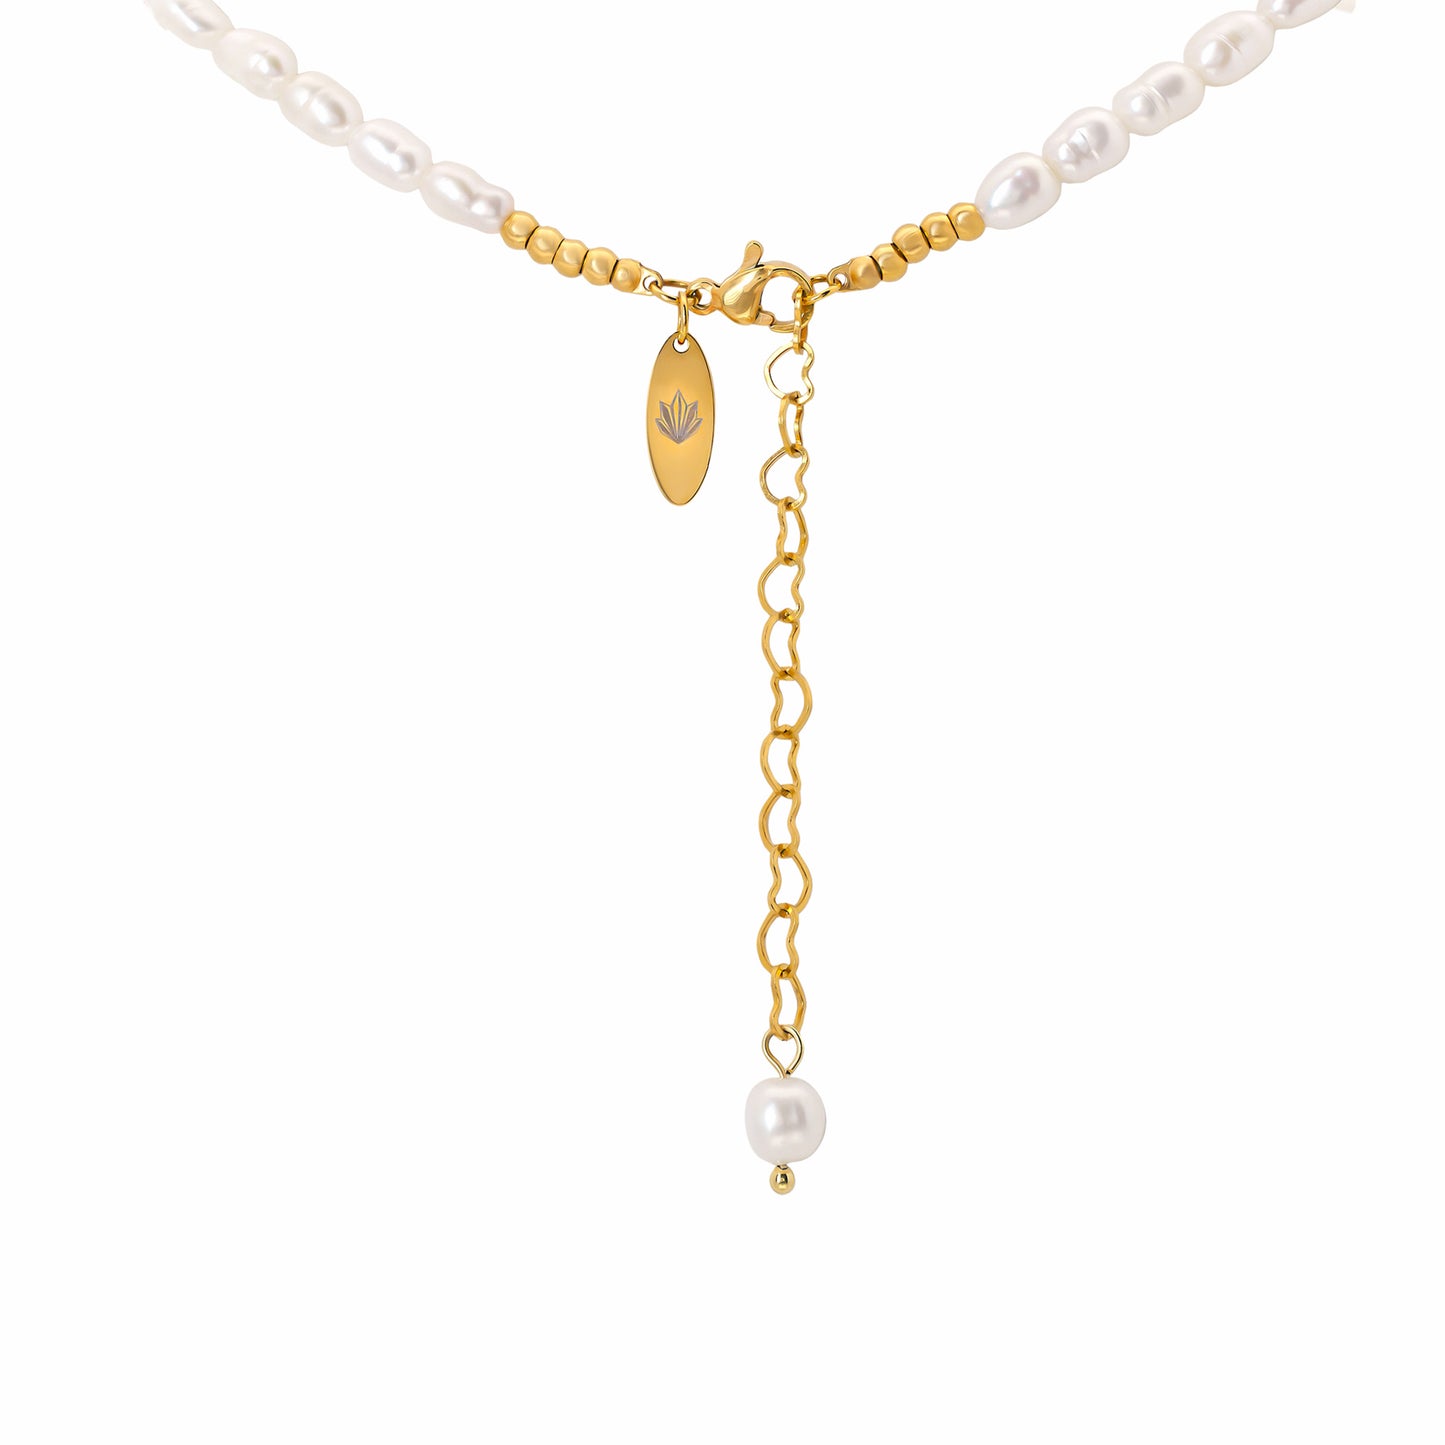 Lily of the Valley Pearl Necklace back side with clasp, extender with Crysttal logo tag